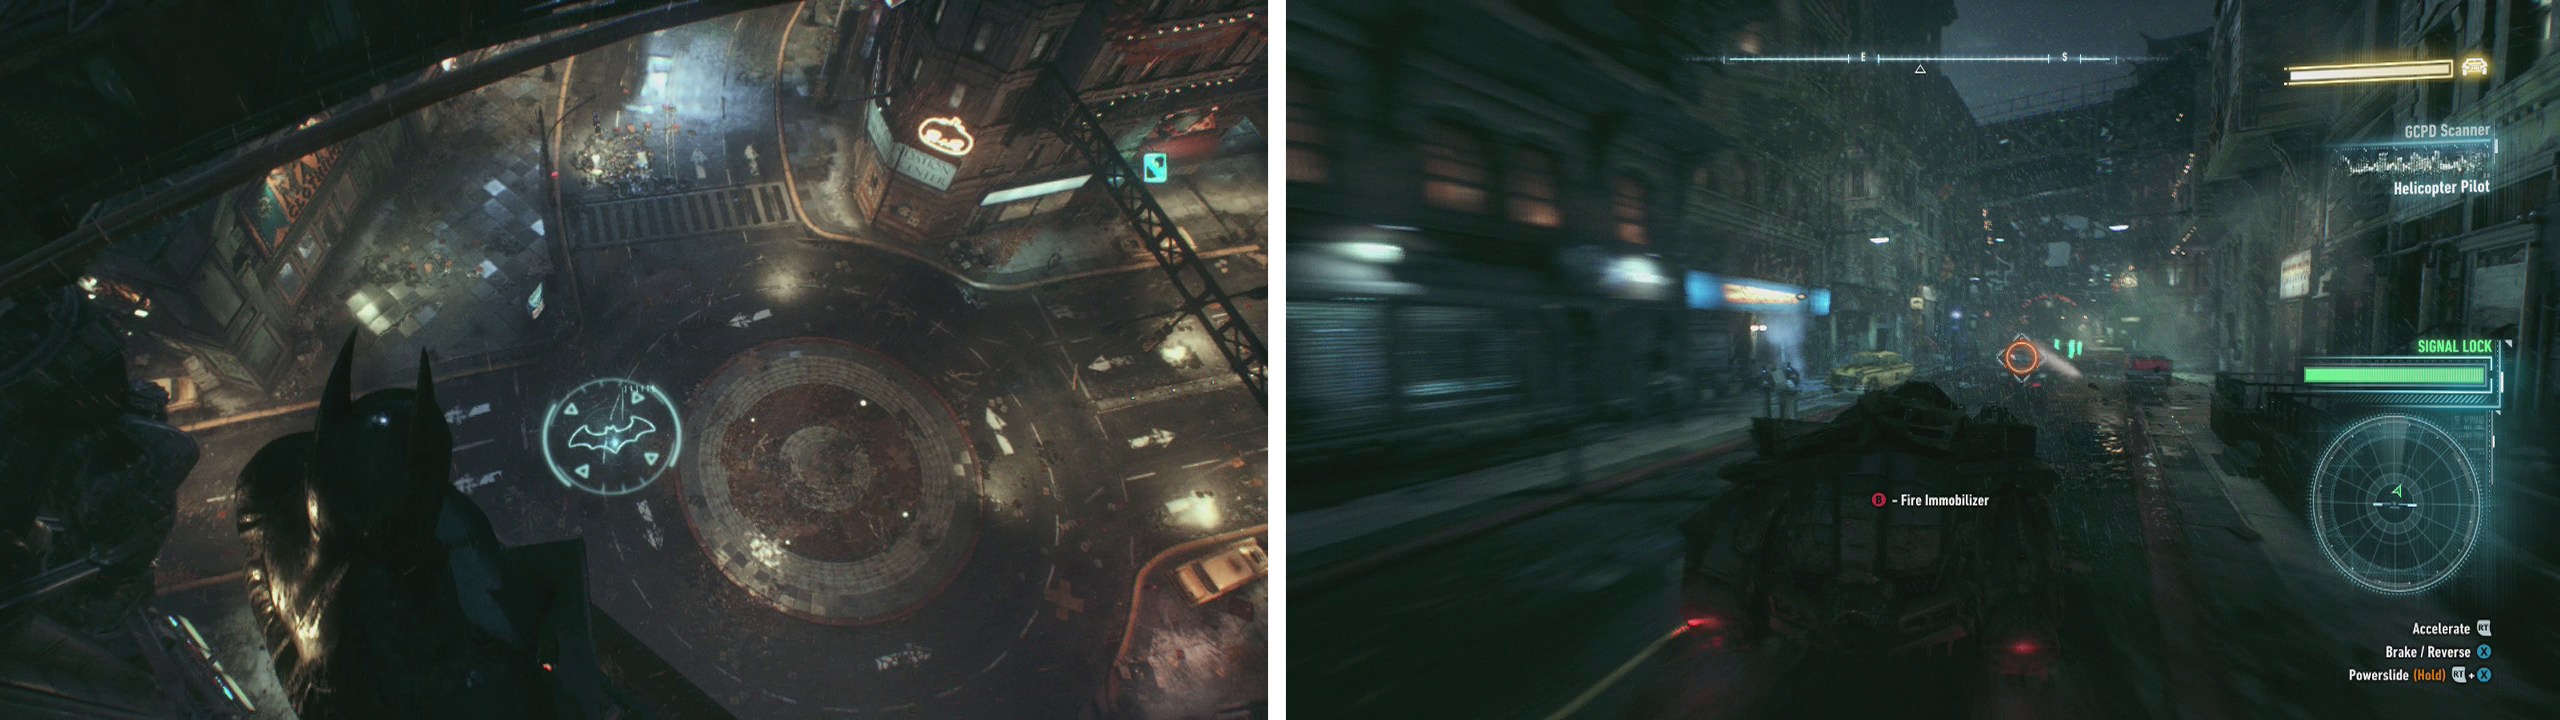 Hit the LB/L1 button to summon the Batmobile (left). Chase down the target and use the Immobiliser (right).